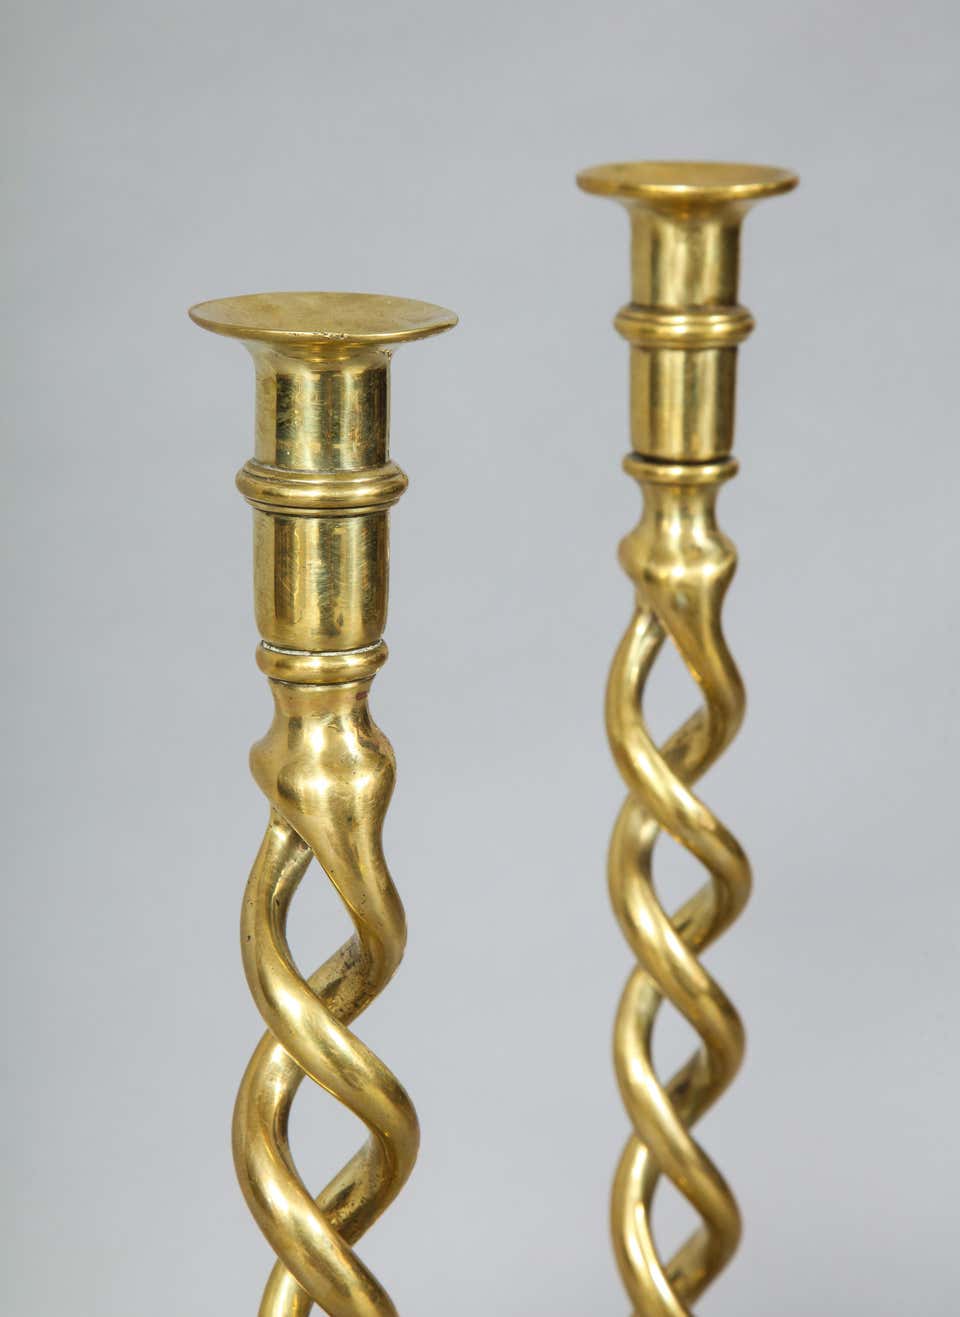 Pair of English Brass Overscale Barley Twist Candlesticks – Yew Tree House